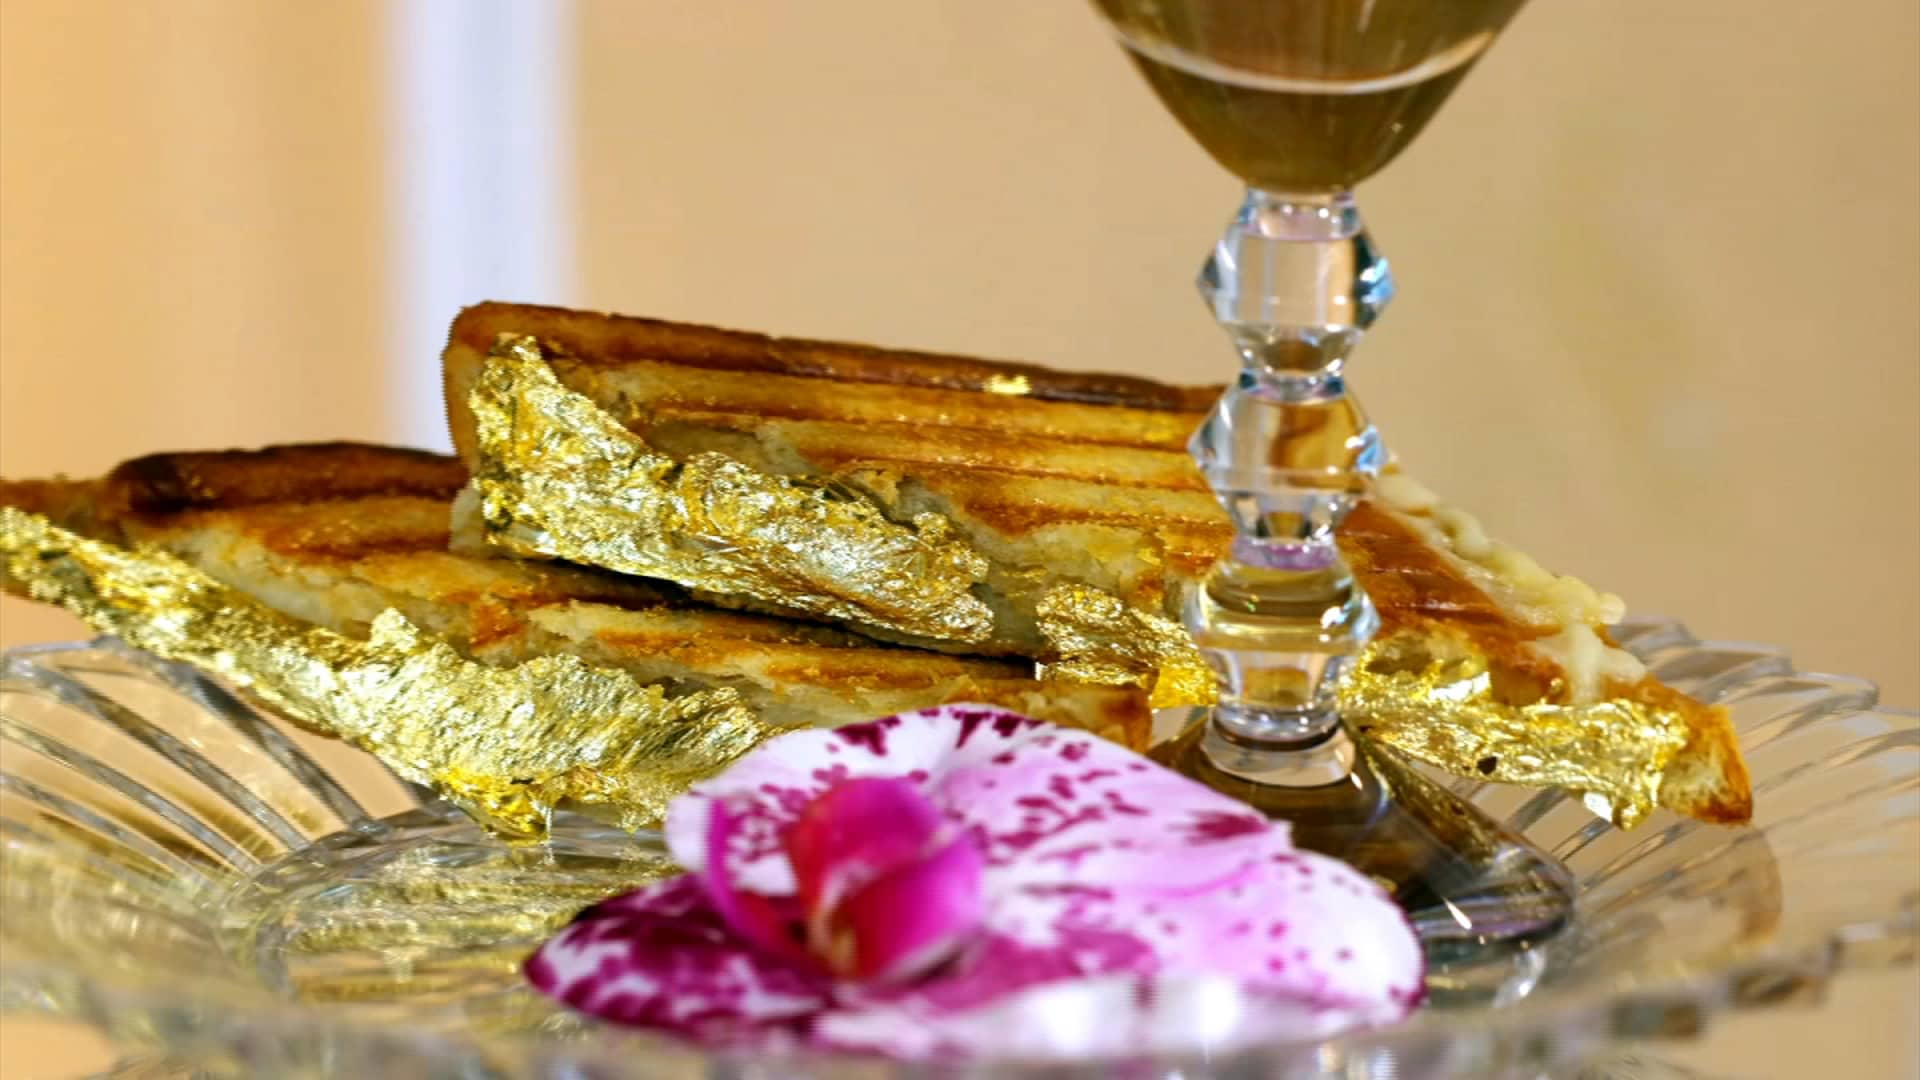 The world’s most expensive sandwich is a gold-covered grilled cheese